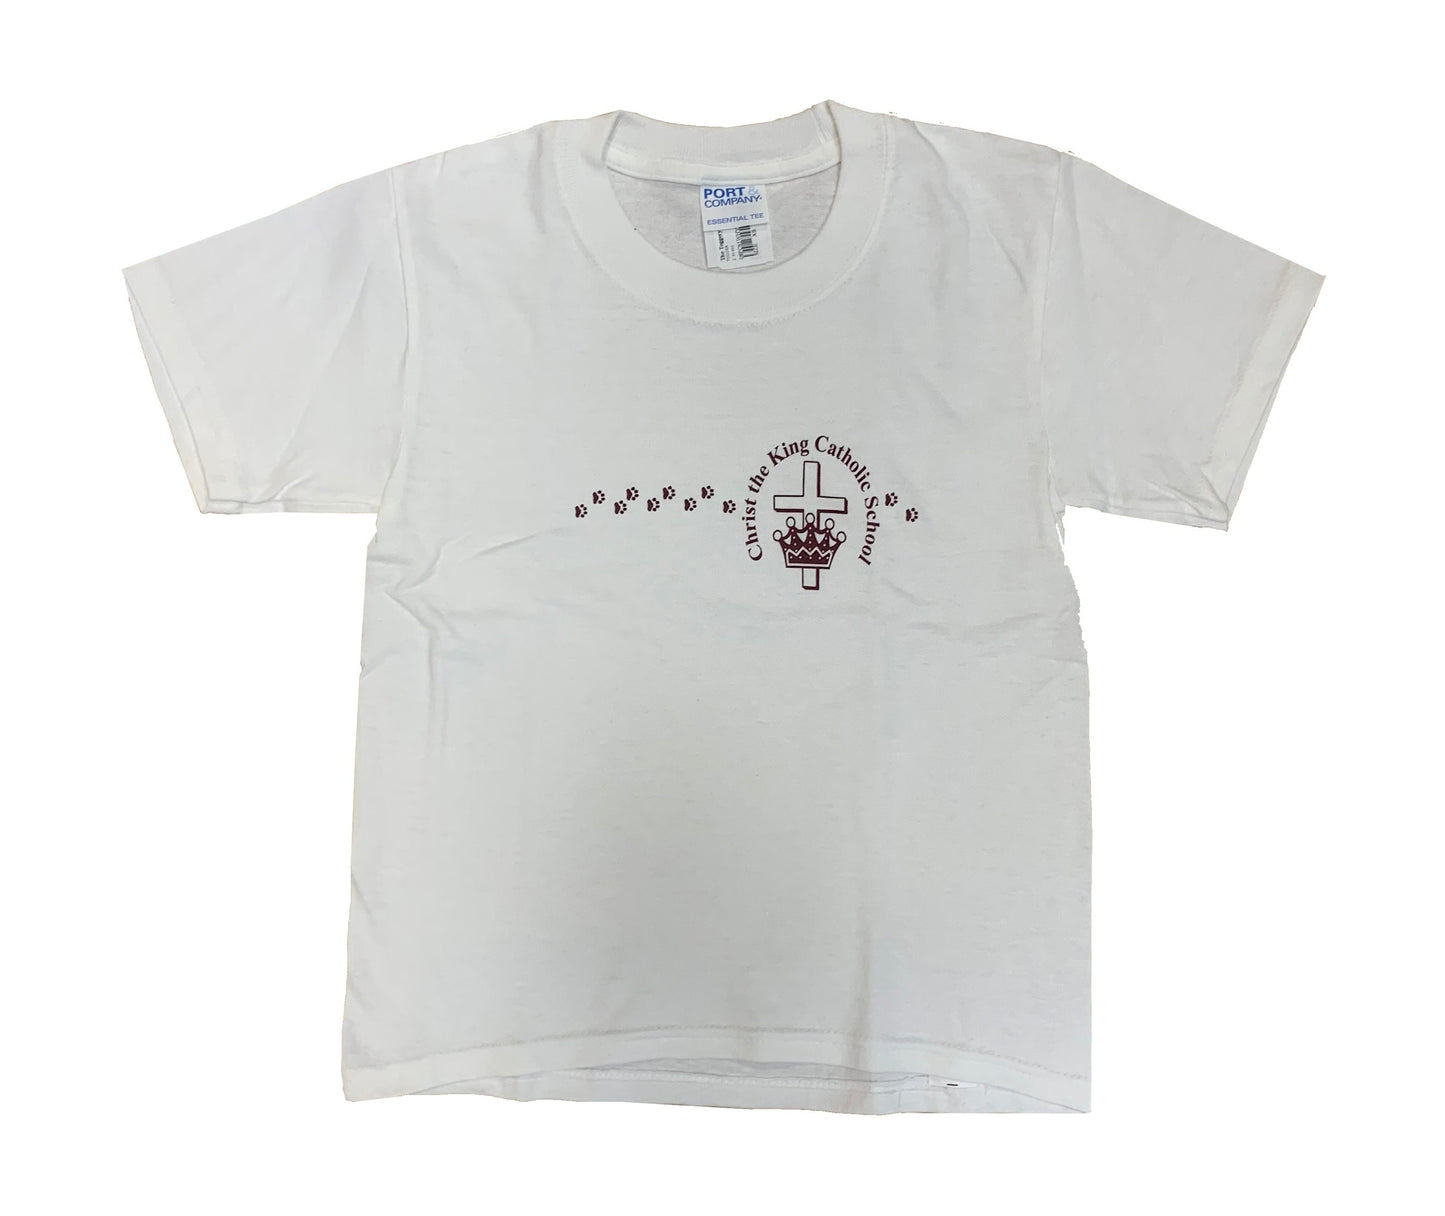 Adult Short Sleeve Tee With Christ The King School Logo